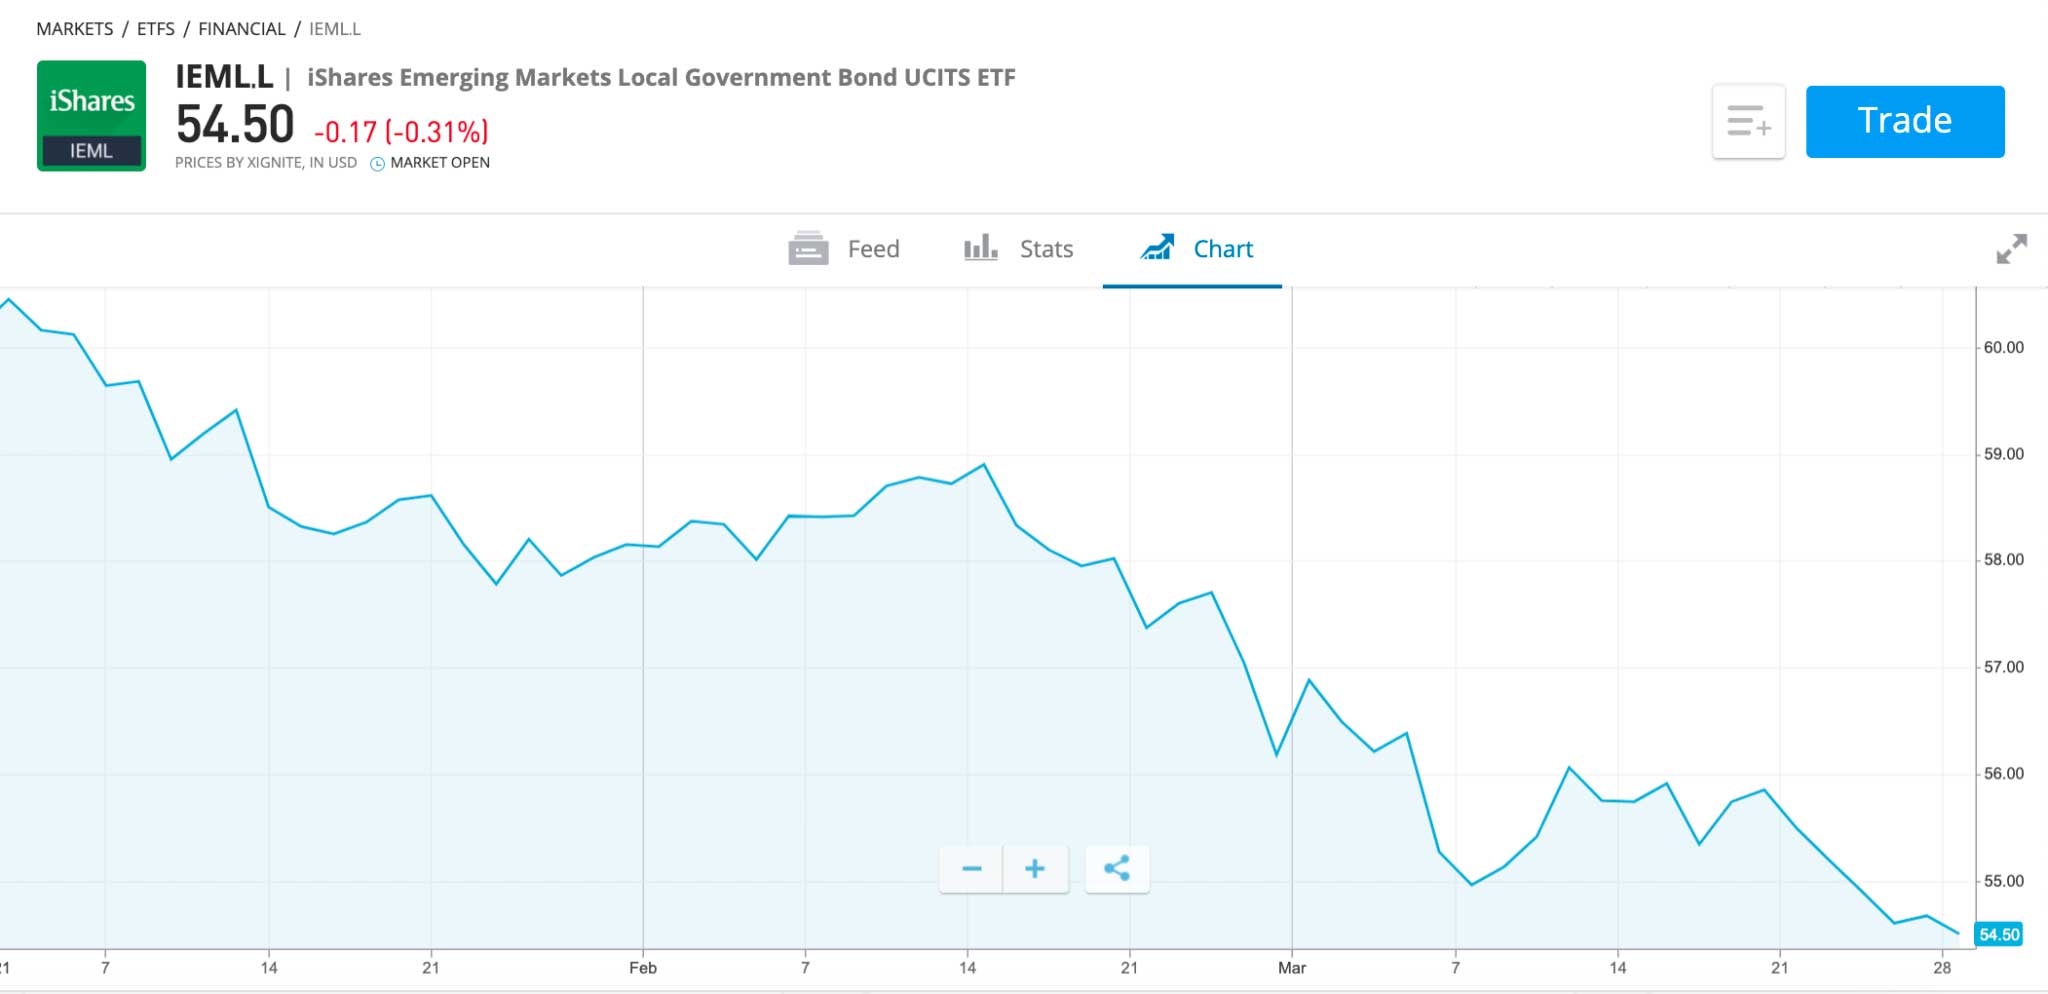 iShares Emerging Markets Local Government Bond UCITS ETF